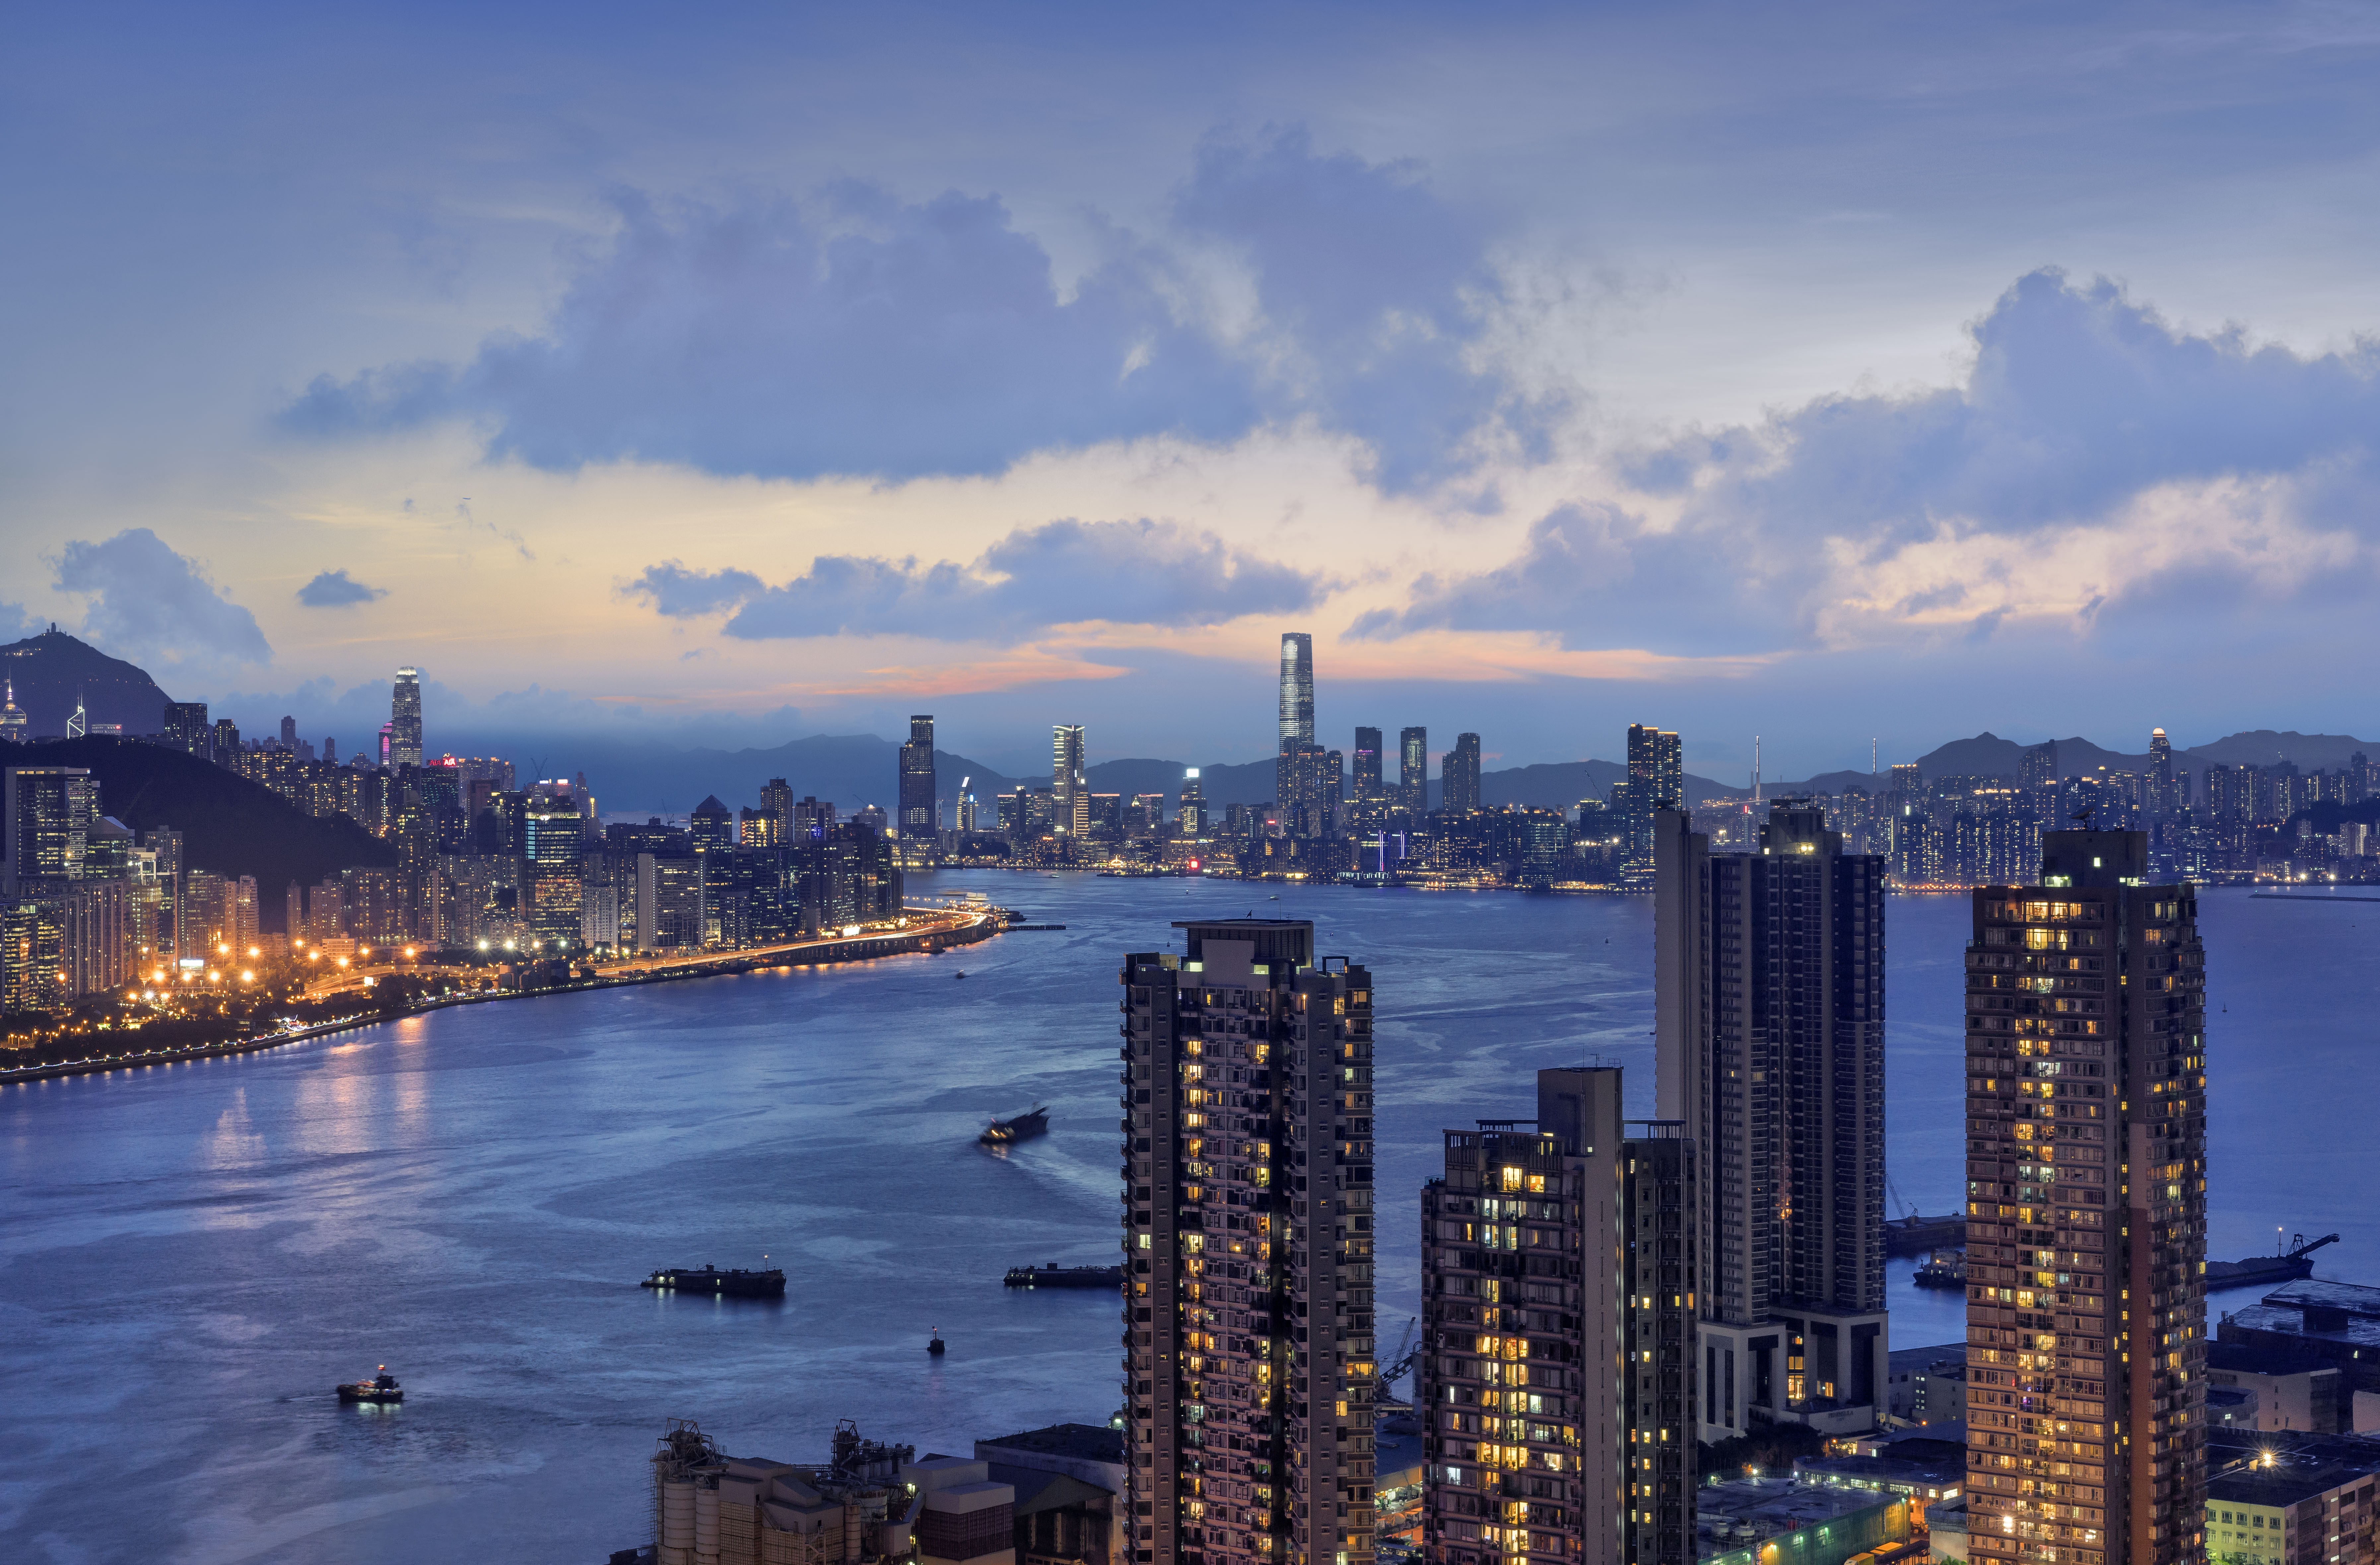 A view of Hong Kong from Devil's Peak by French photographer Romain Jacquet-Lagrèze, featured in the An Invitation to Travel: Blue Hour, Hong Kong Overseas exhibition, hosted by Vacheron Constantin.